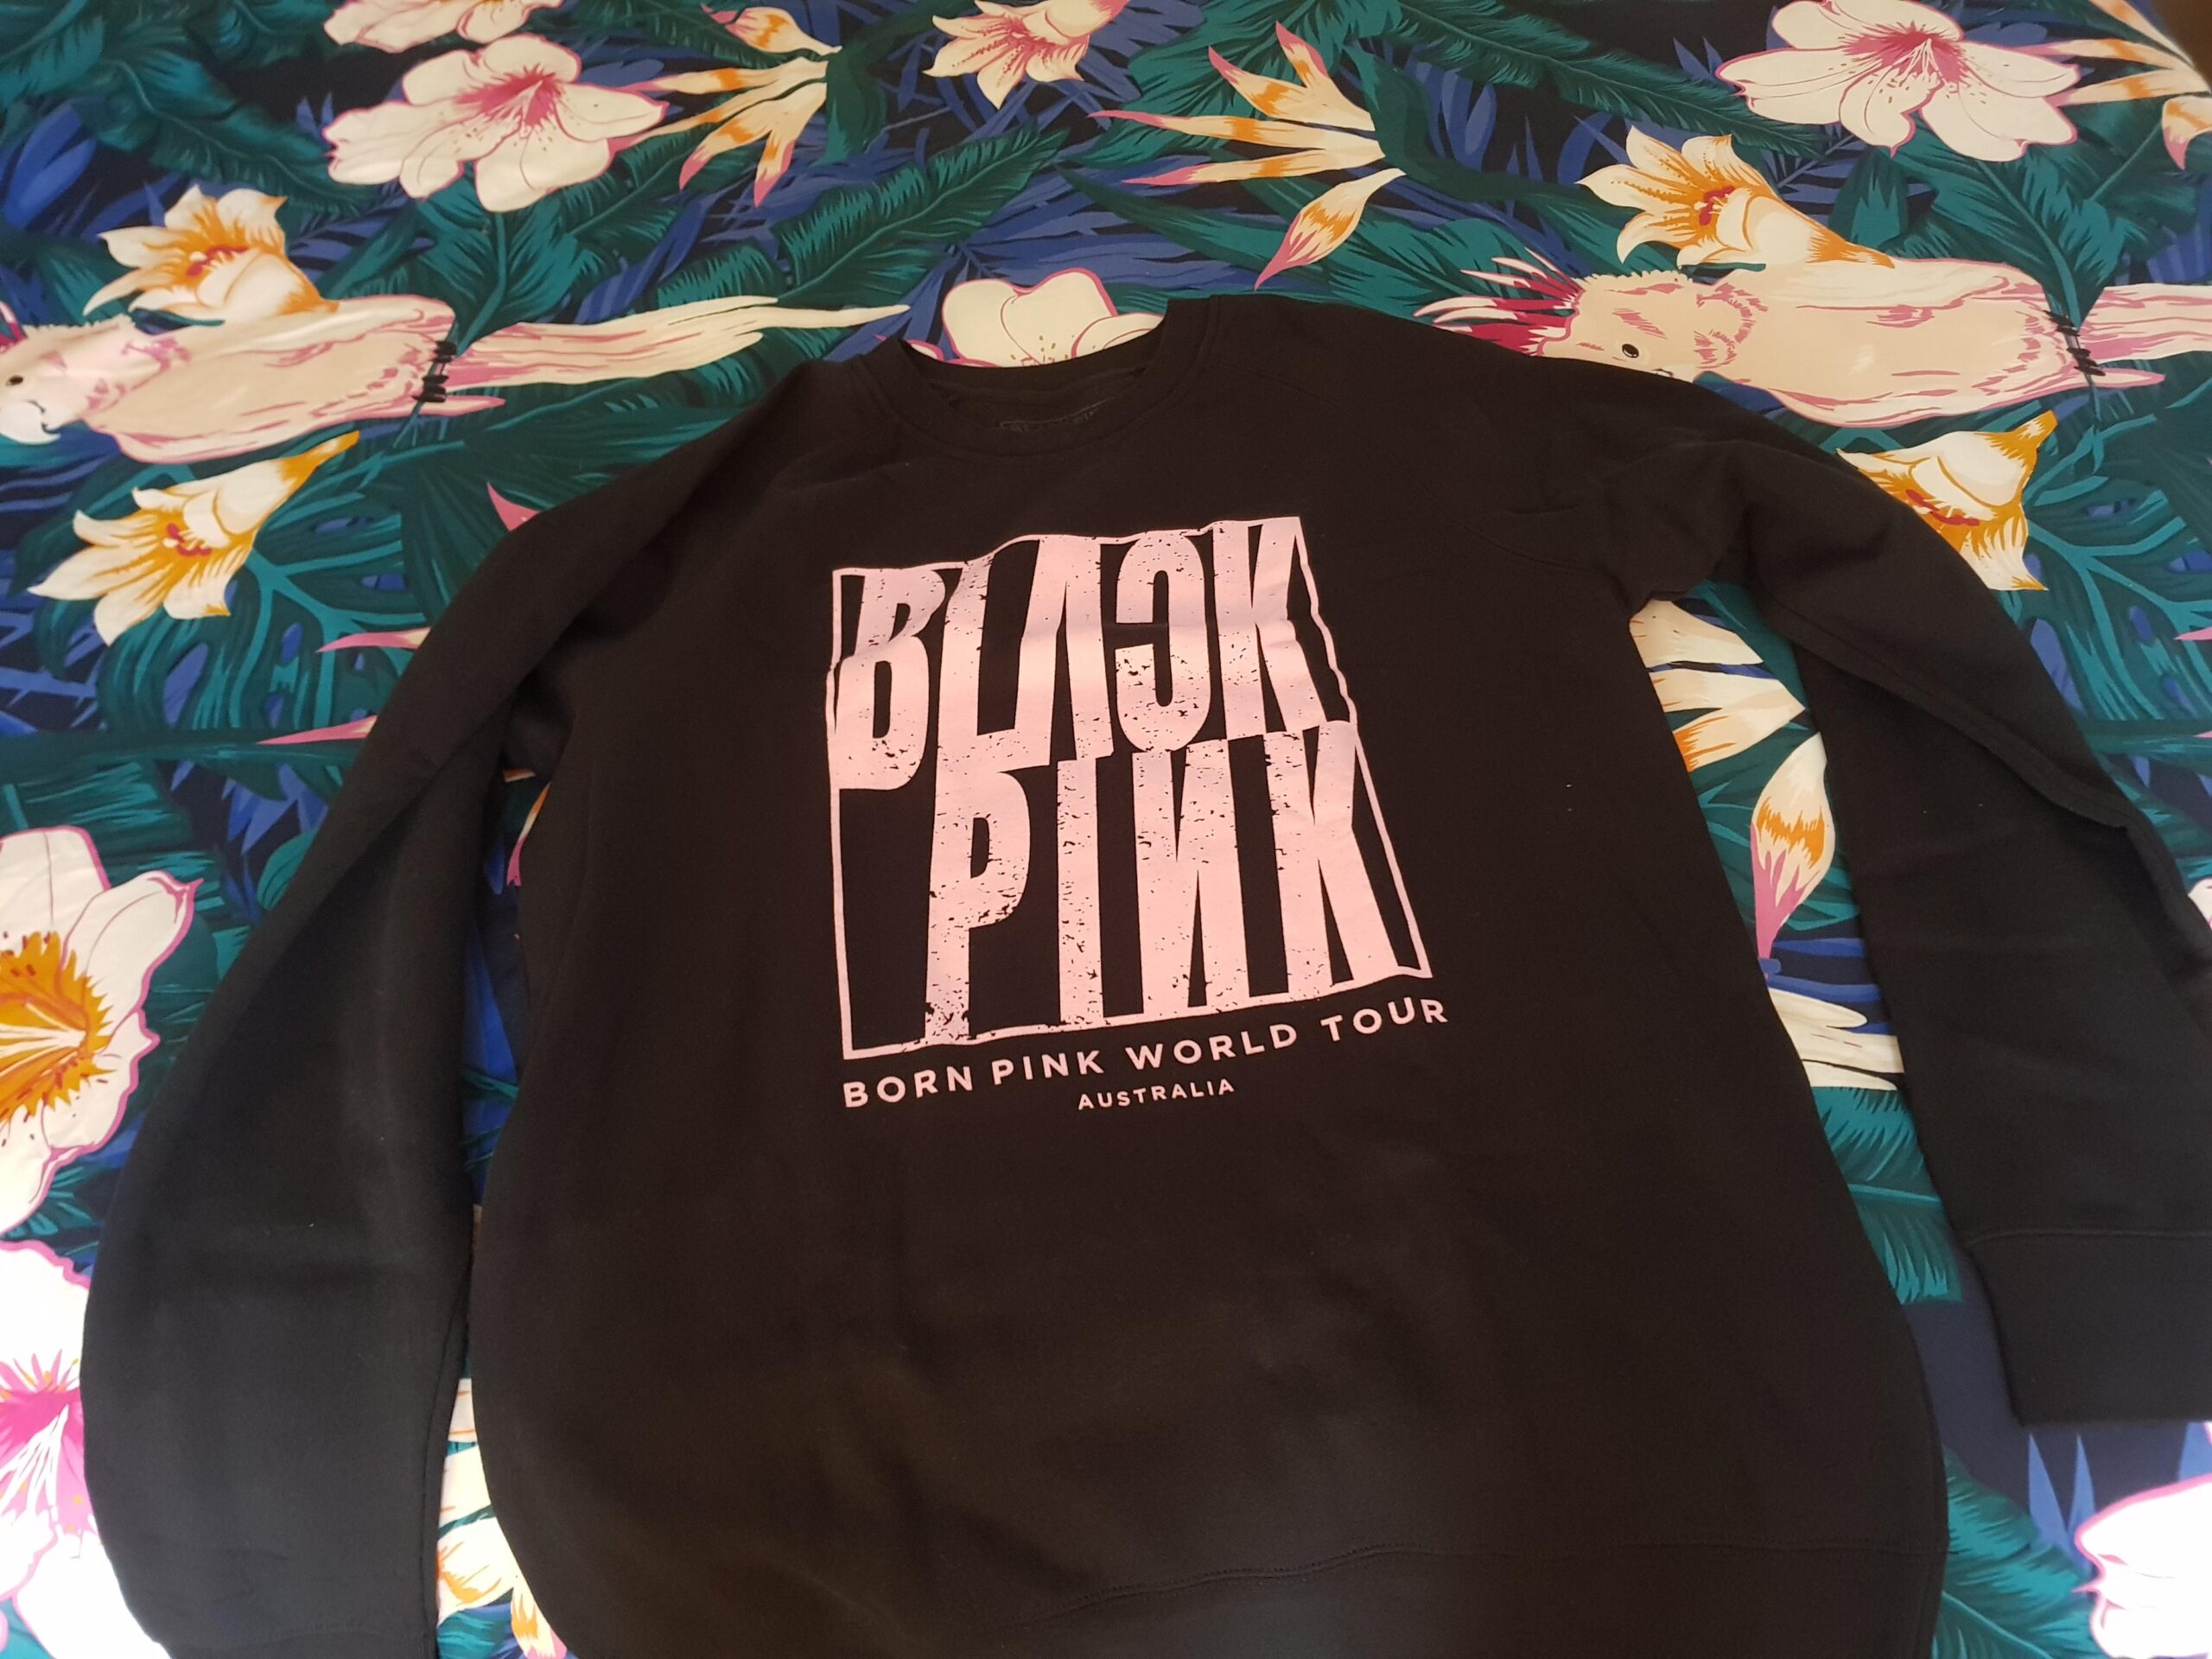 251023 Bought the Blackpink Sweater after their Australian leg of their Born Pink tour